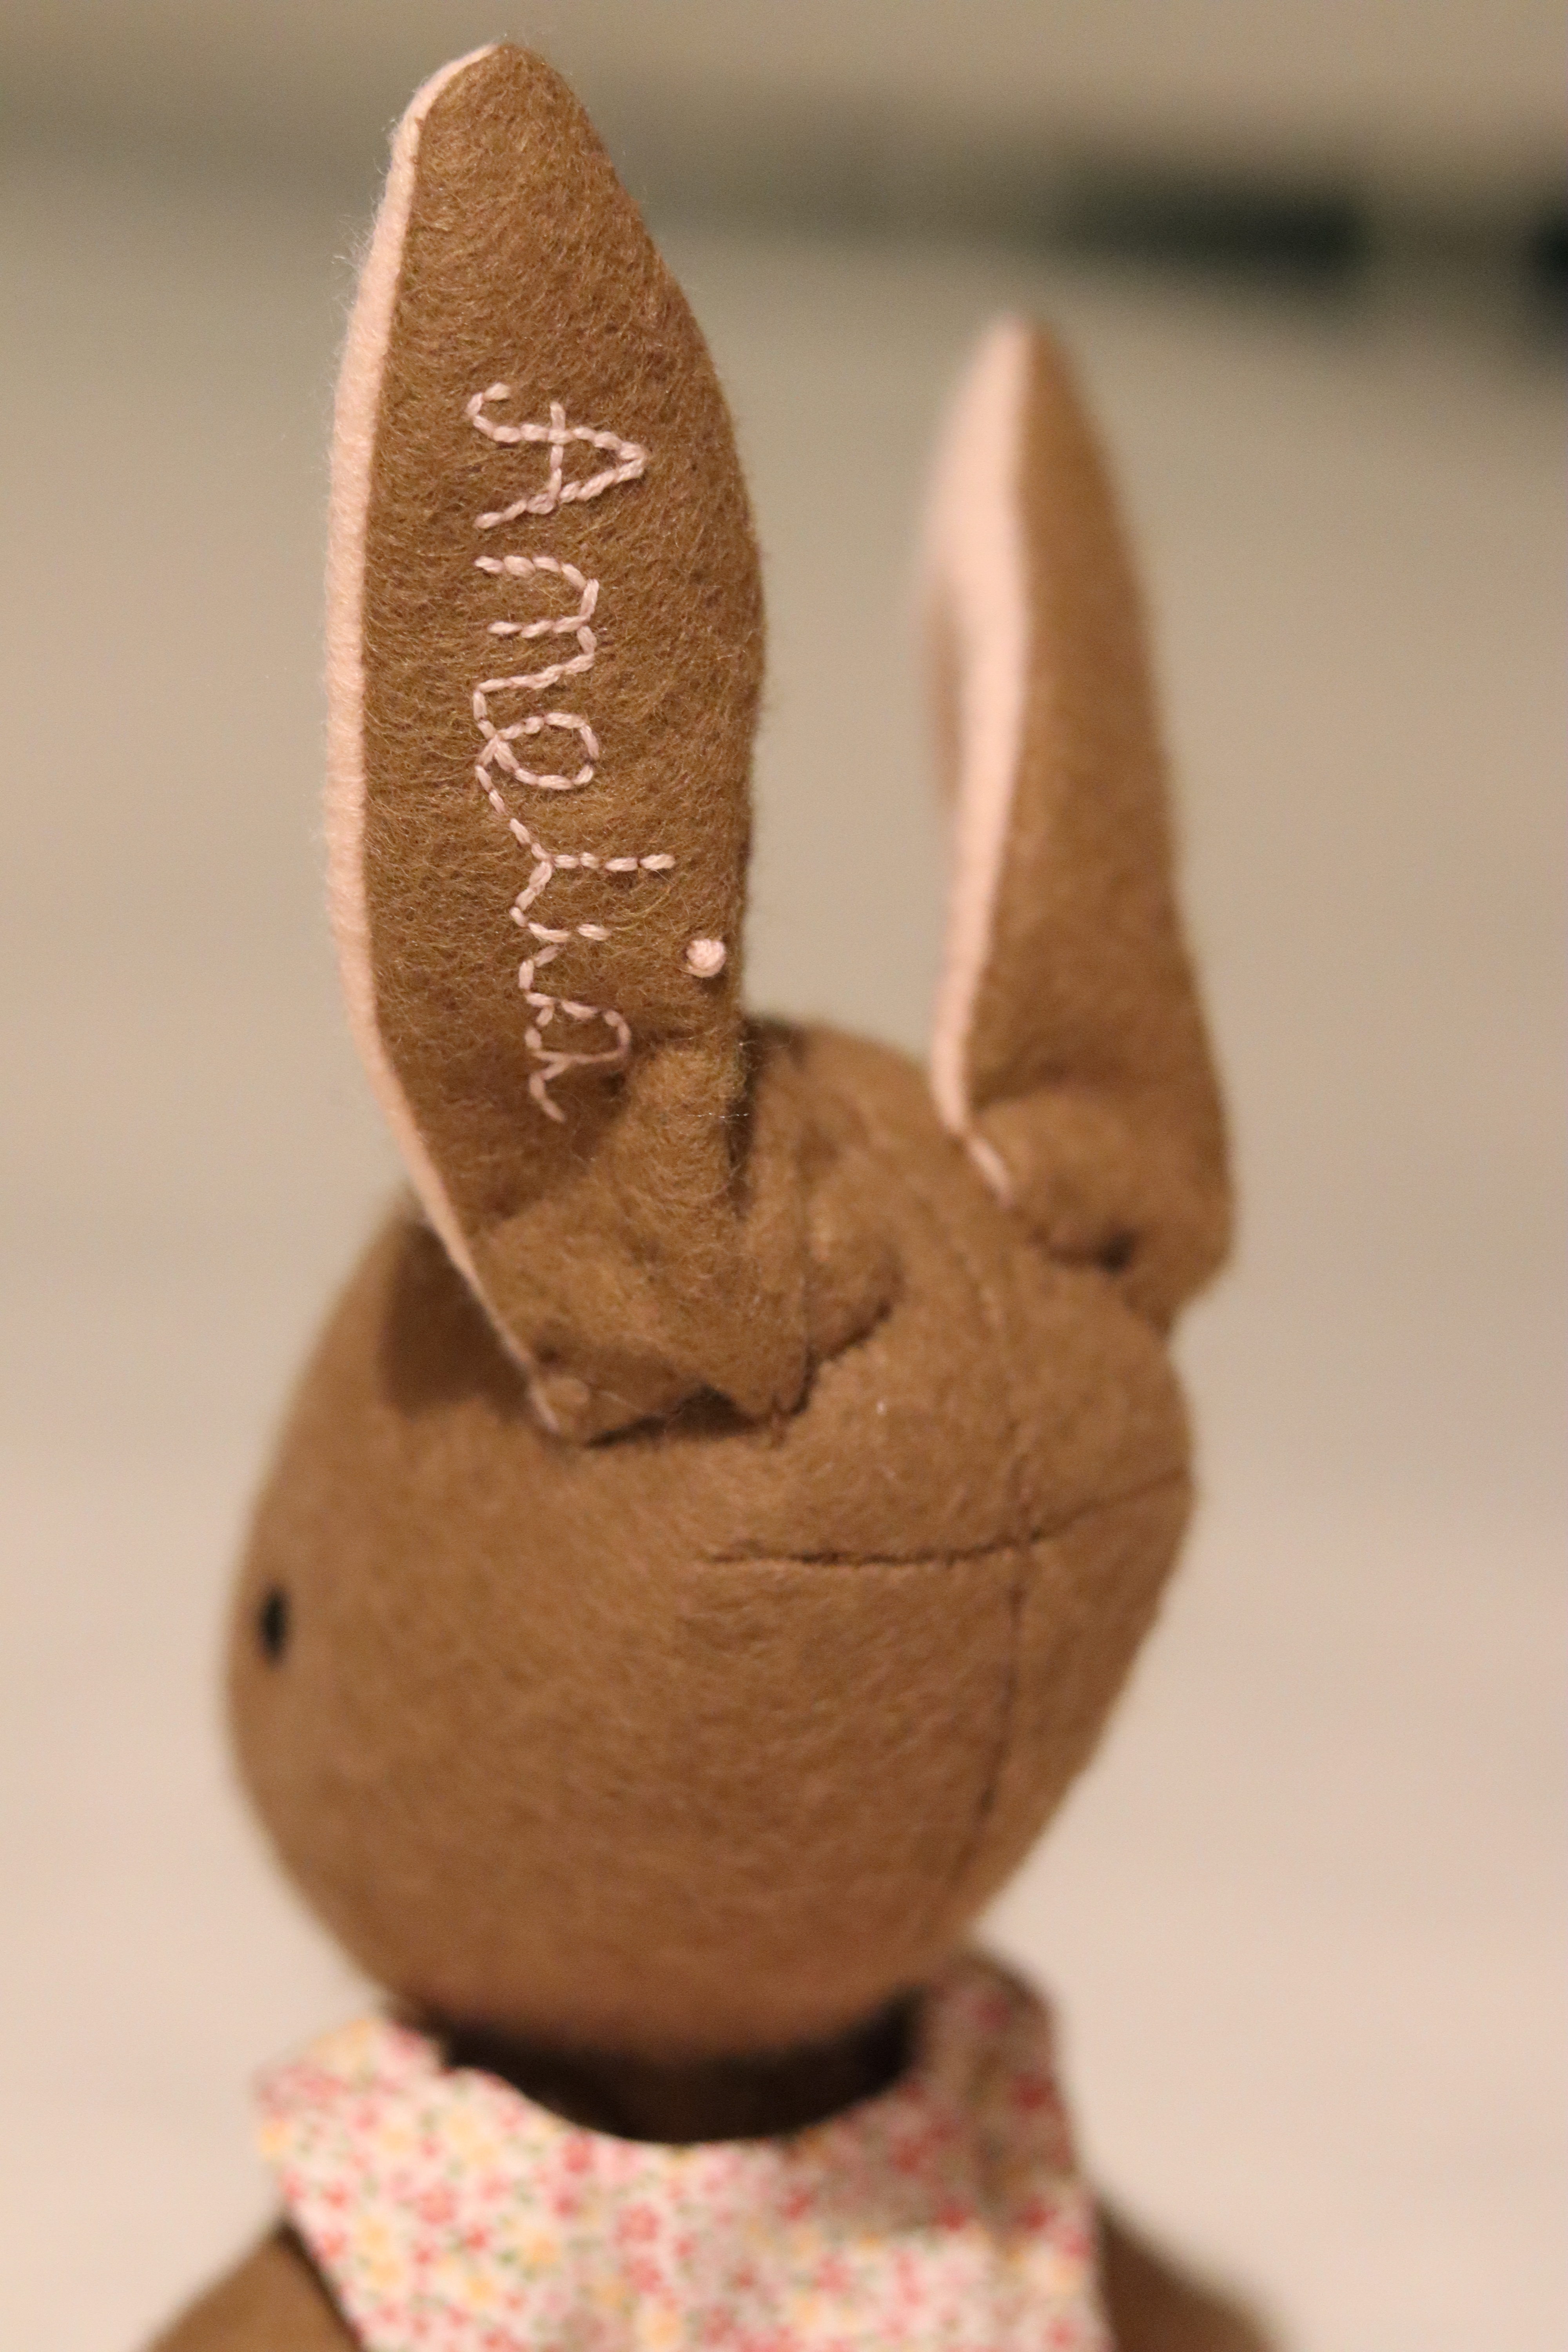 A handmade brown felt bunny rabbit with cotton floral dress and a natural linen coat with a hand embroidered name on her ear. Made using a pattern by Simone Gooding.